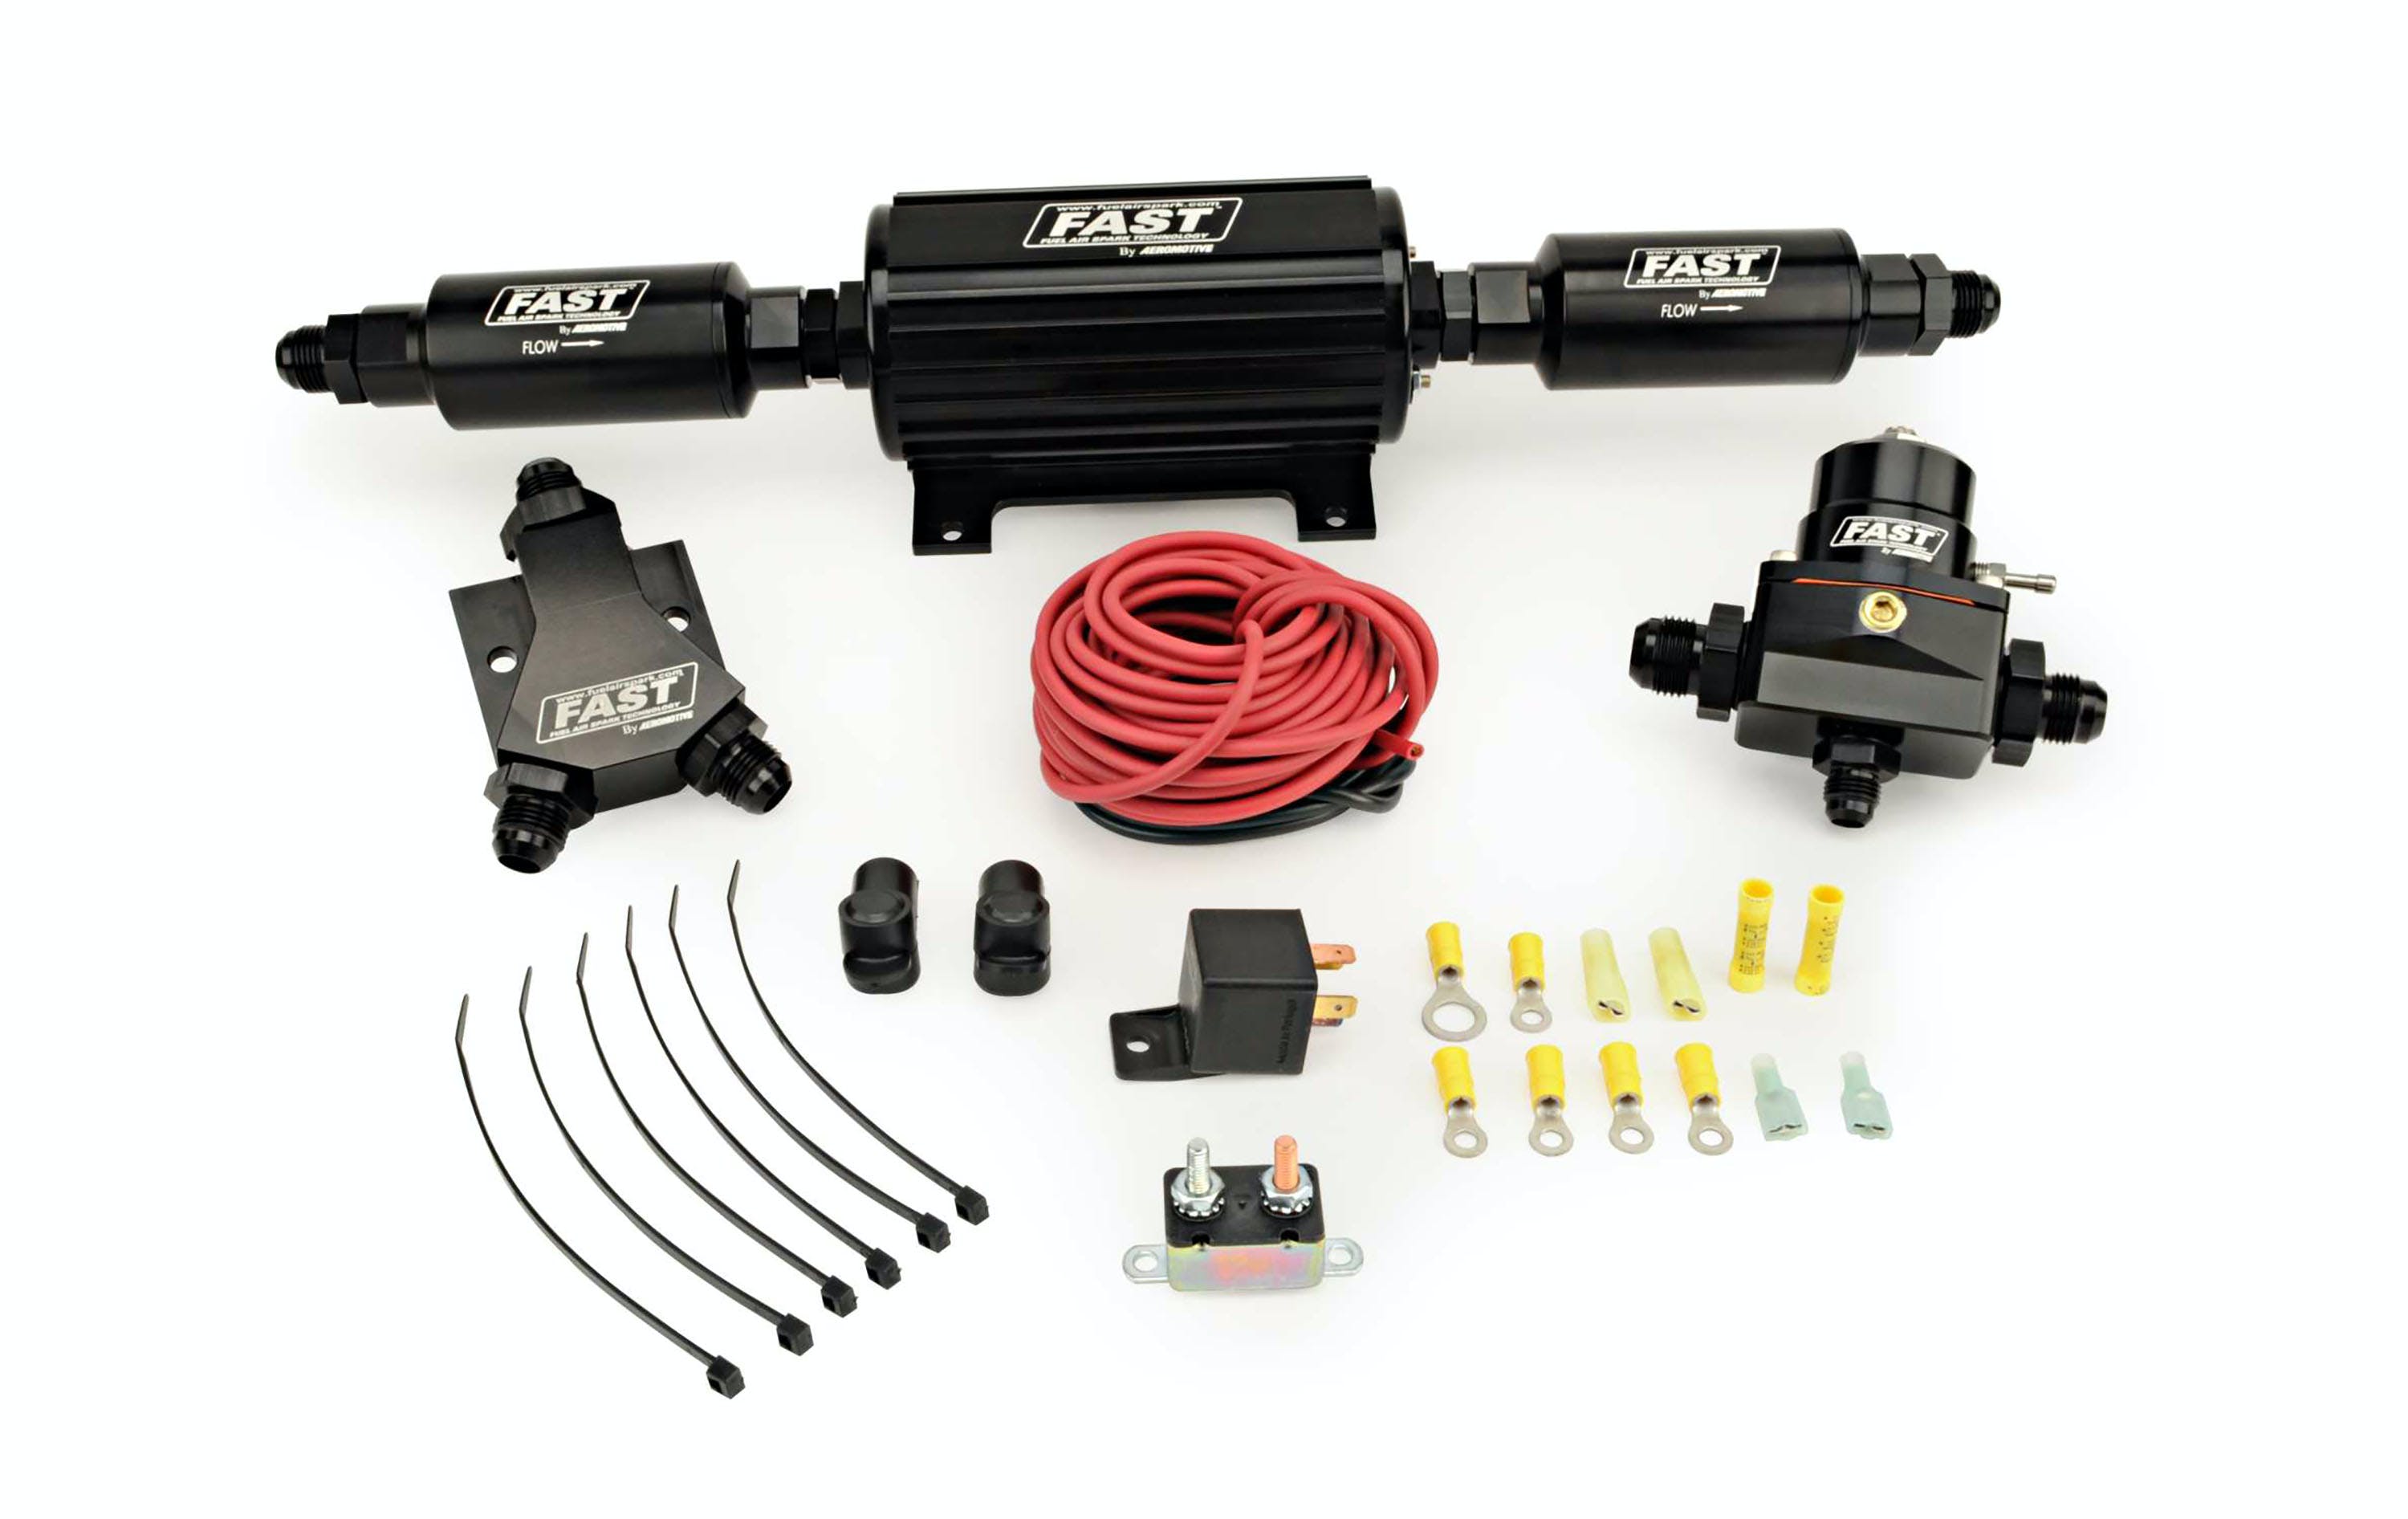 FAST - Fuel Air Spark Technology 307500 Inline Race Fuel System